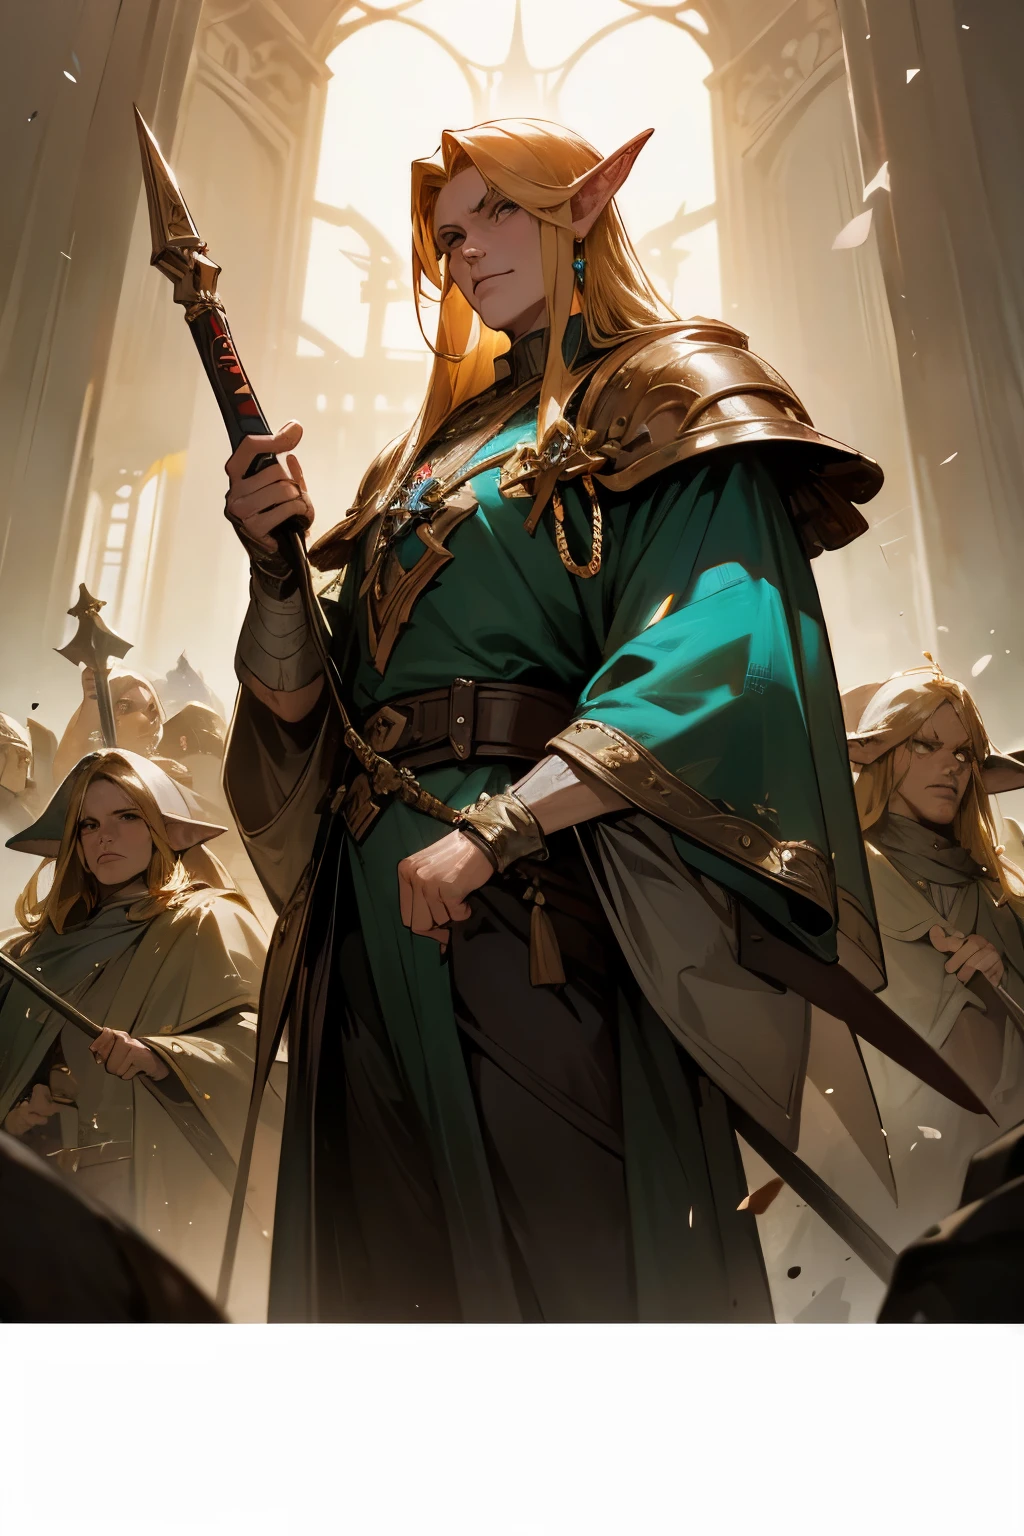 "Generate an artwork inspired by the Warhammer Fantasy universe, depicting an elven character. The elf should be male, aged 96, standing at 174 cm, possessing emerald eyes, and adorned with golden blond hair. Equip the character with a sword in one hand and a hand-held dwarf pistol in the other. Immerse the scene in the distinct stylistic elements of the Warhammer Fantasy universe, capturing the dark and gritty ambiance characteristic of this fantasy realm